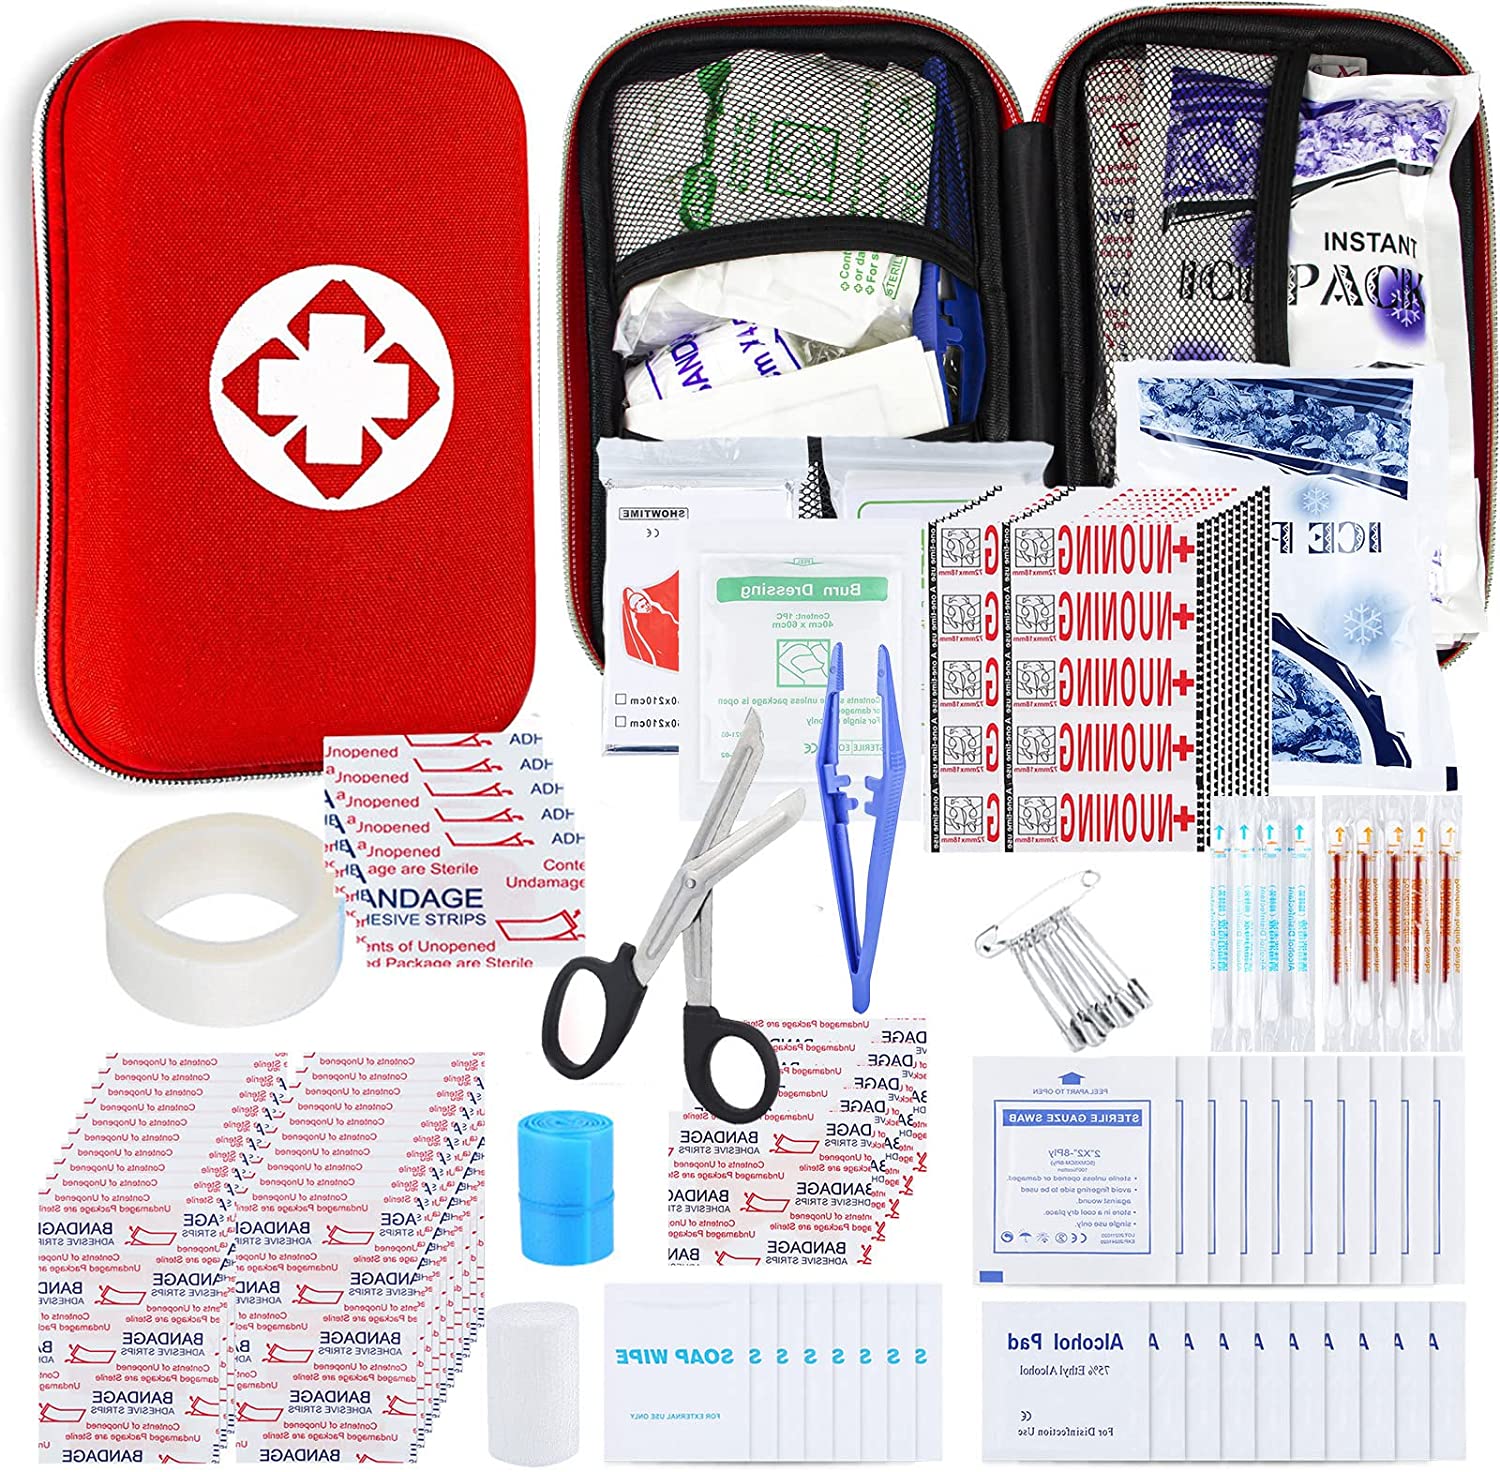 Small-Waterproof Car First-Aid Kit Emergency-Kit – 273Piece Camping Equipment for Camping Hiking Home Travel YIDERBO